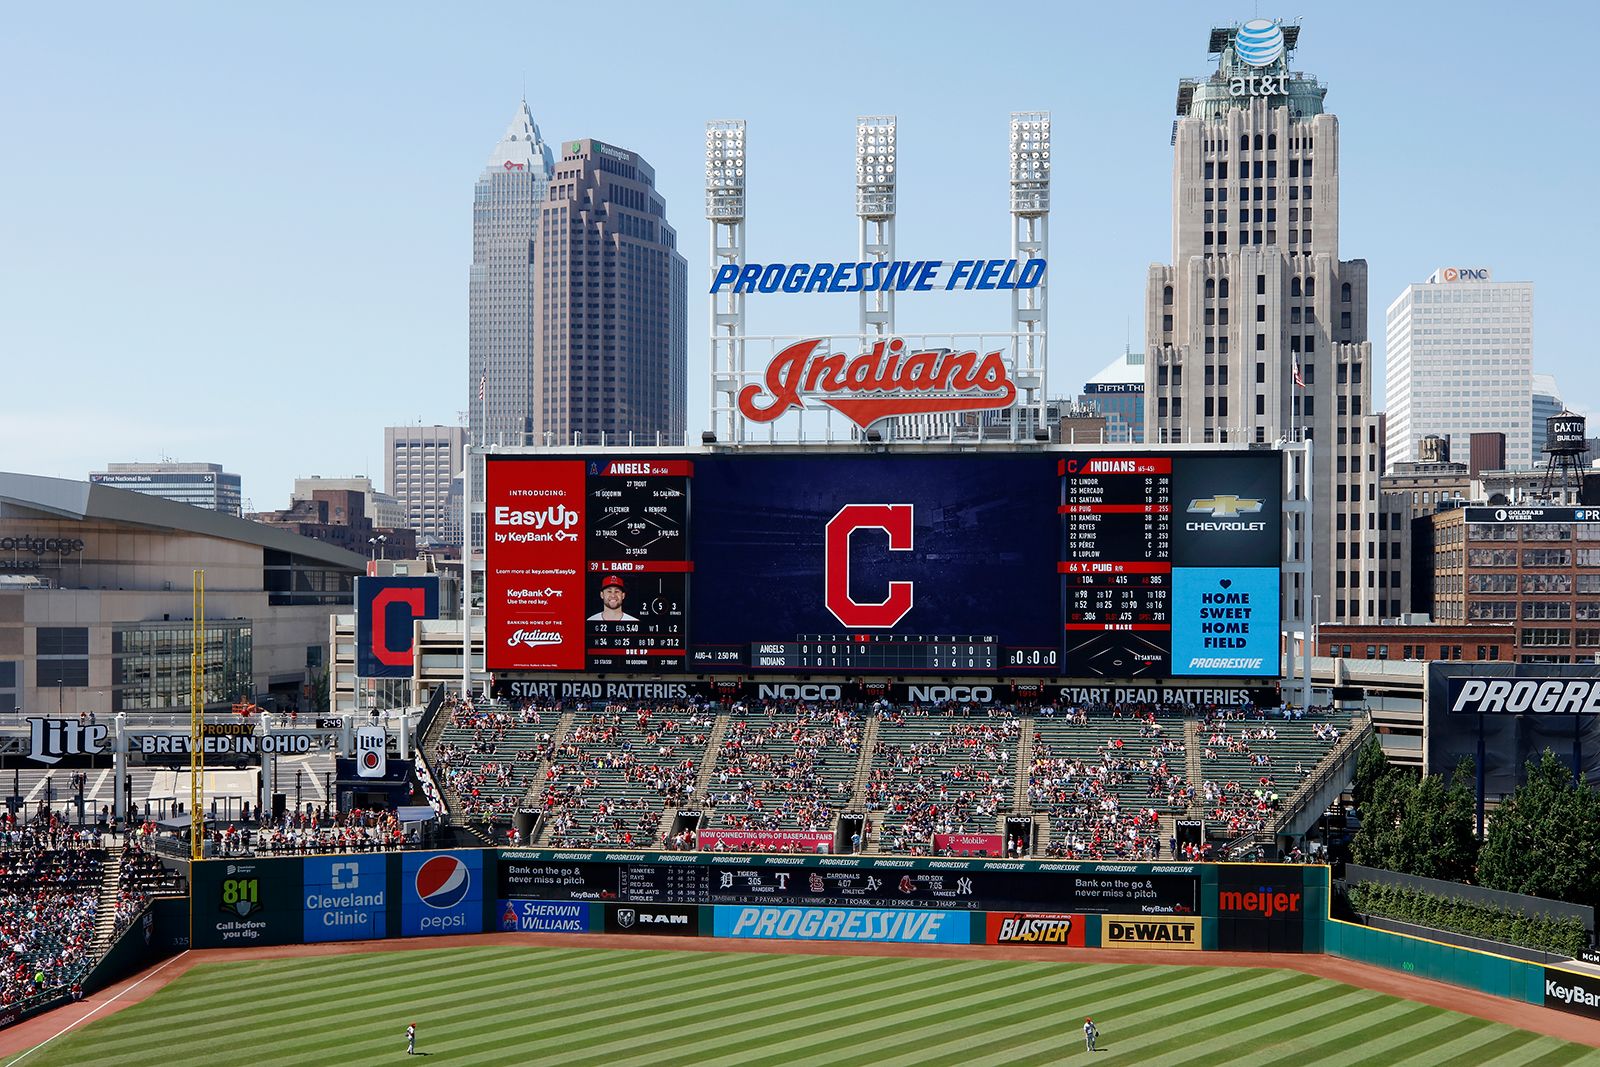 Cleveland baseball team to drop 'Indians' nickname - Sports Illustrated